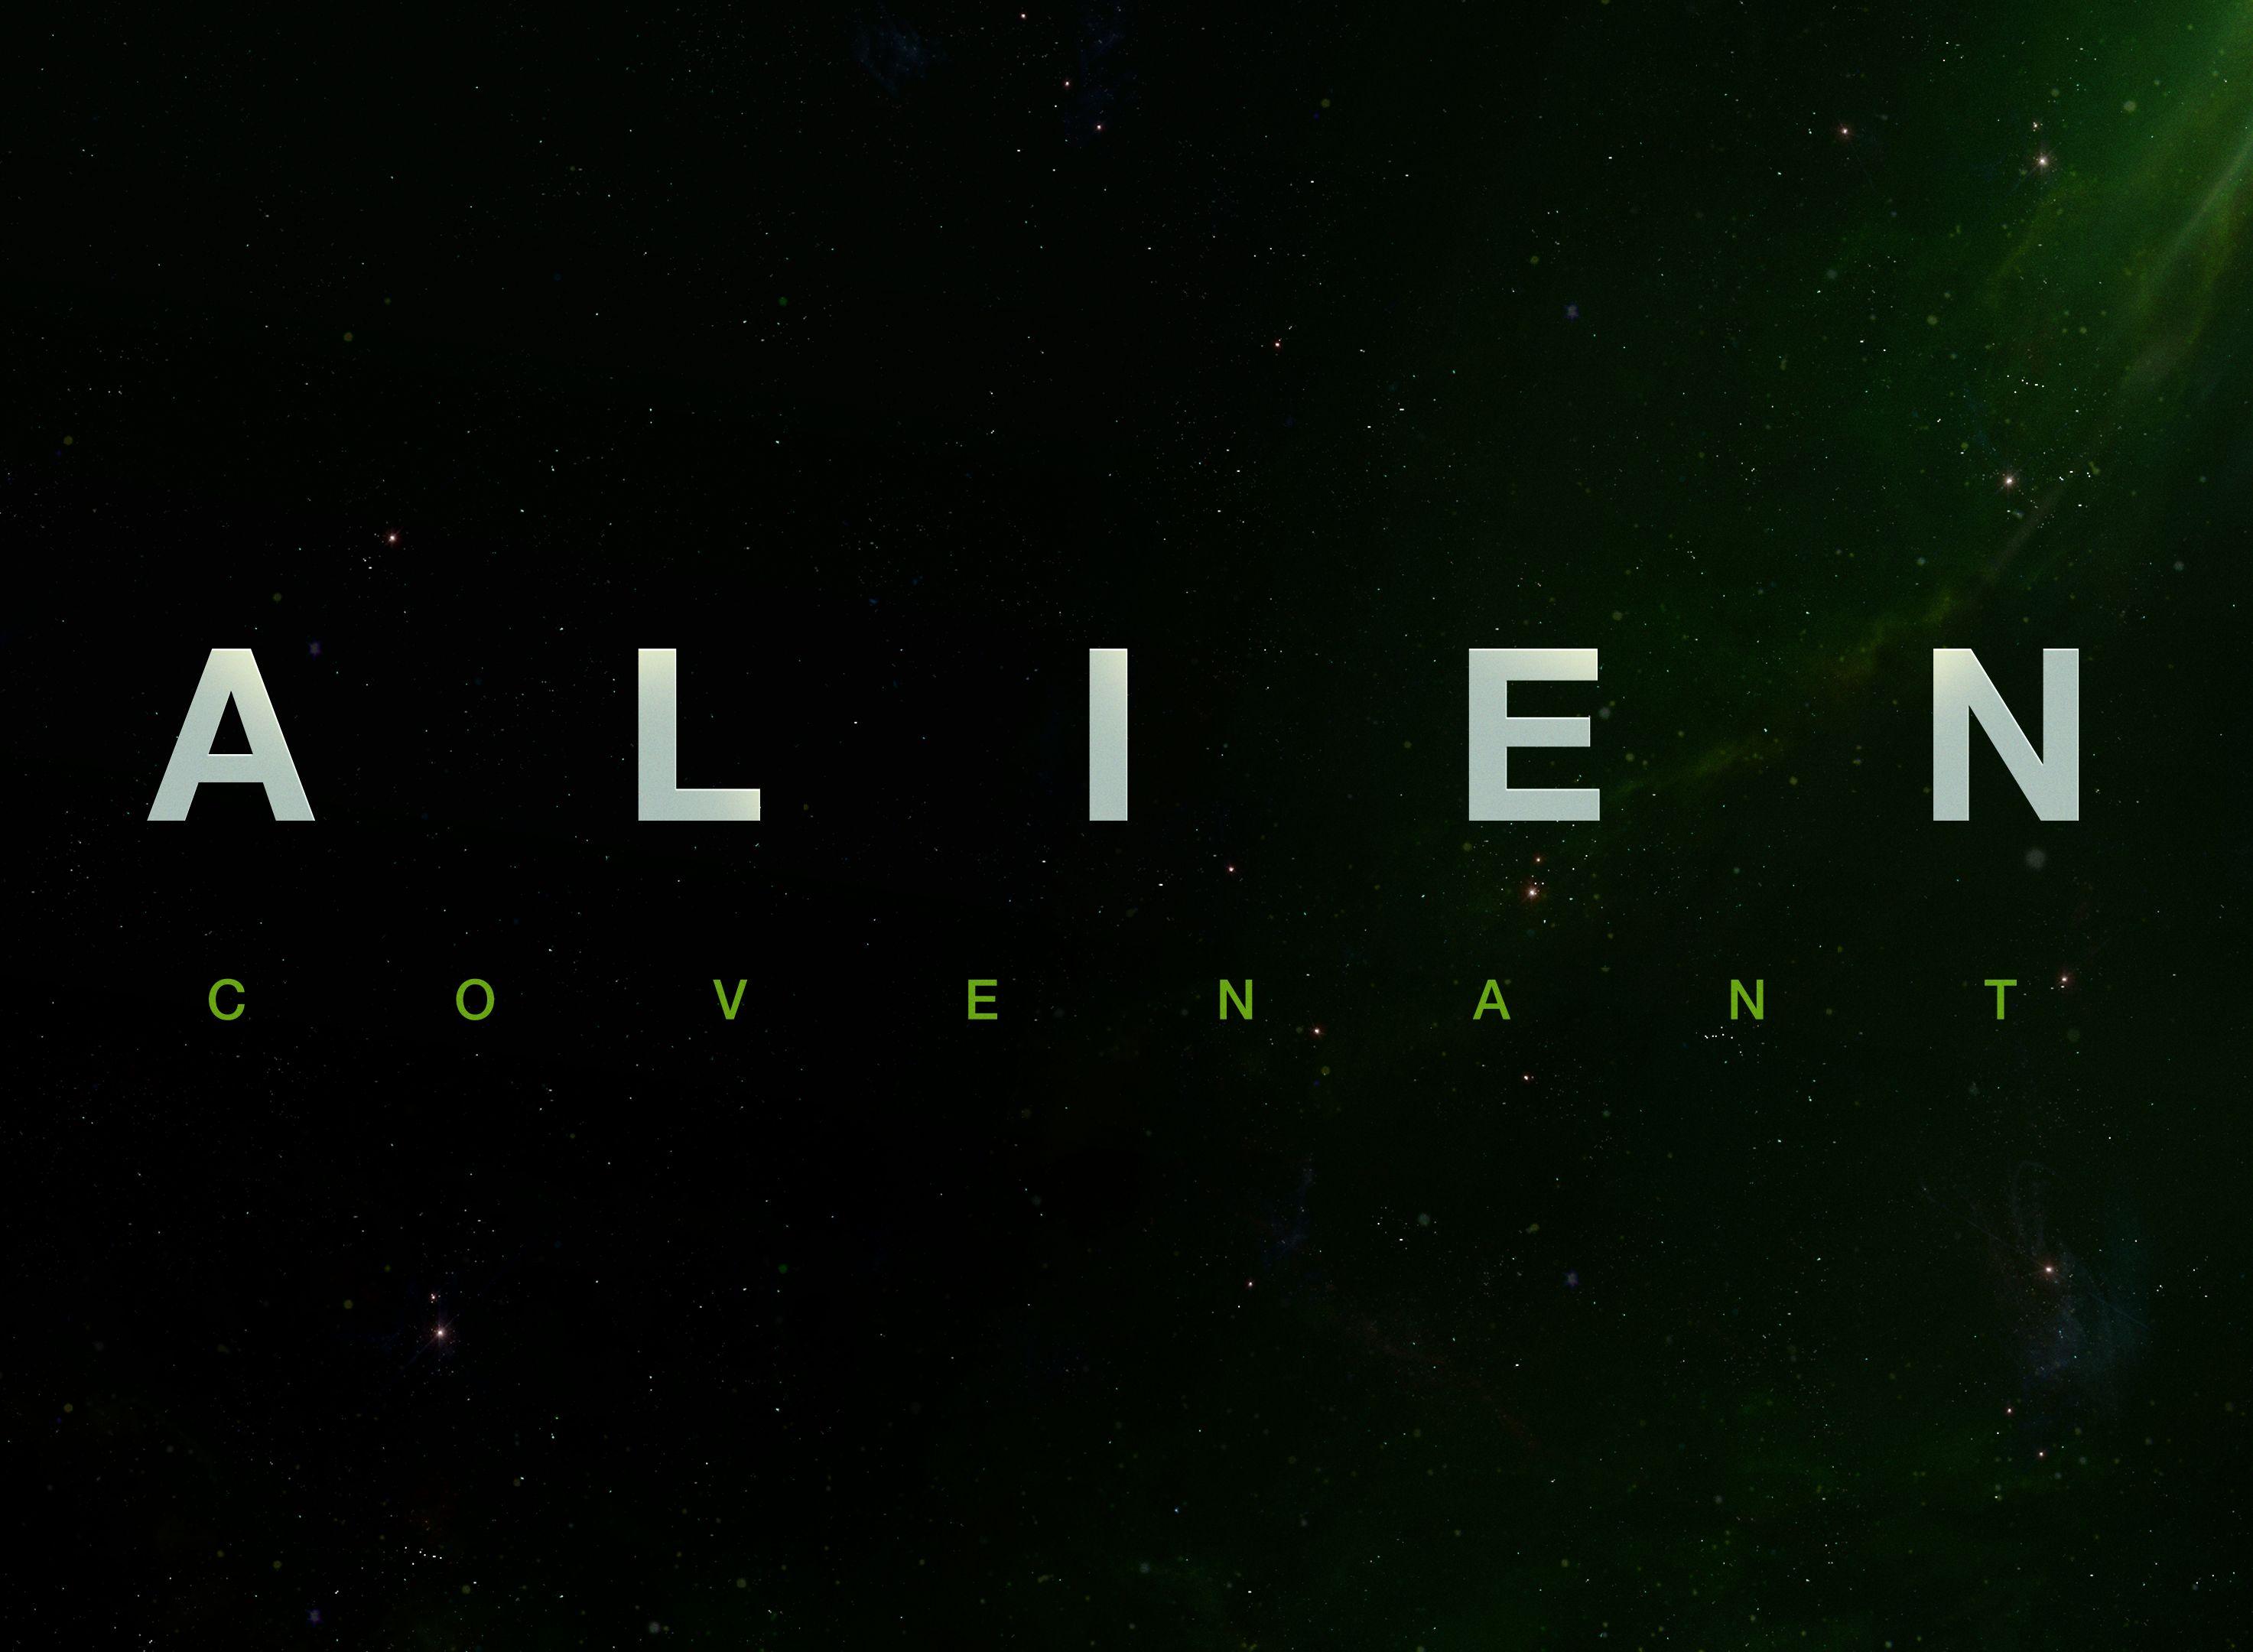 Aliens 2 Logo - Prometheus 2 is now Alien: Covenant, and fully part of the Alien